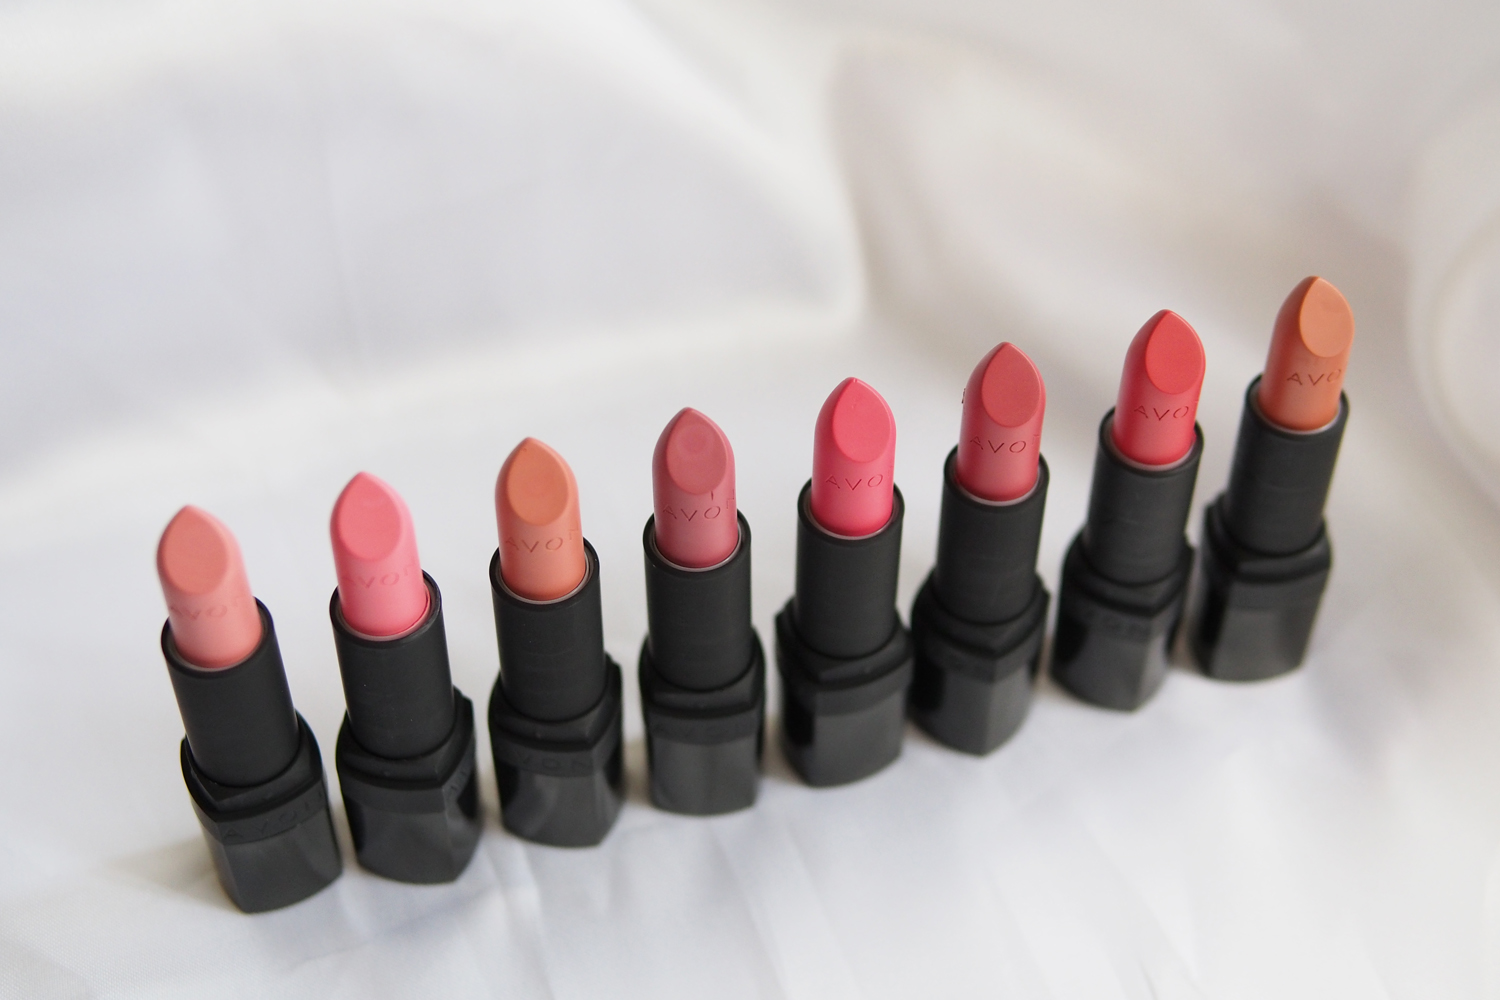 Avon Perfectly Matte Lipstick Swatches including the New Nudes!